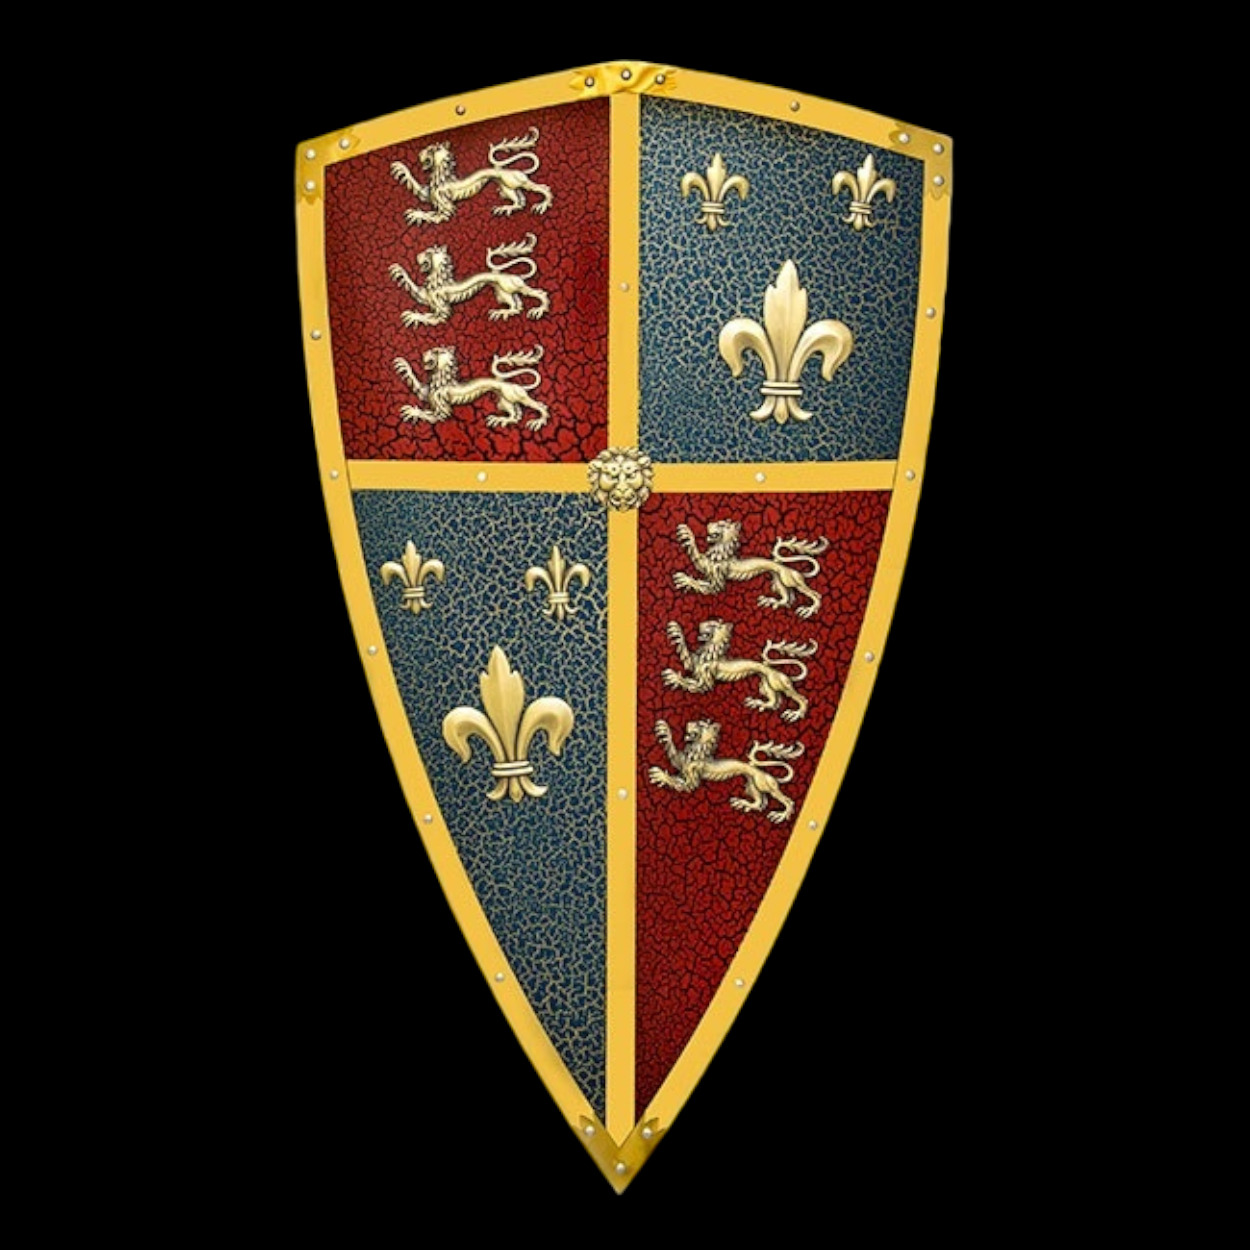 STEEL SHIELD OF THE BLACK PRINCE (806)